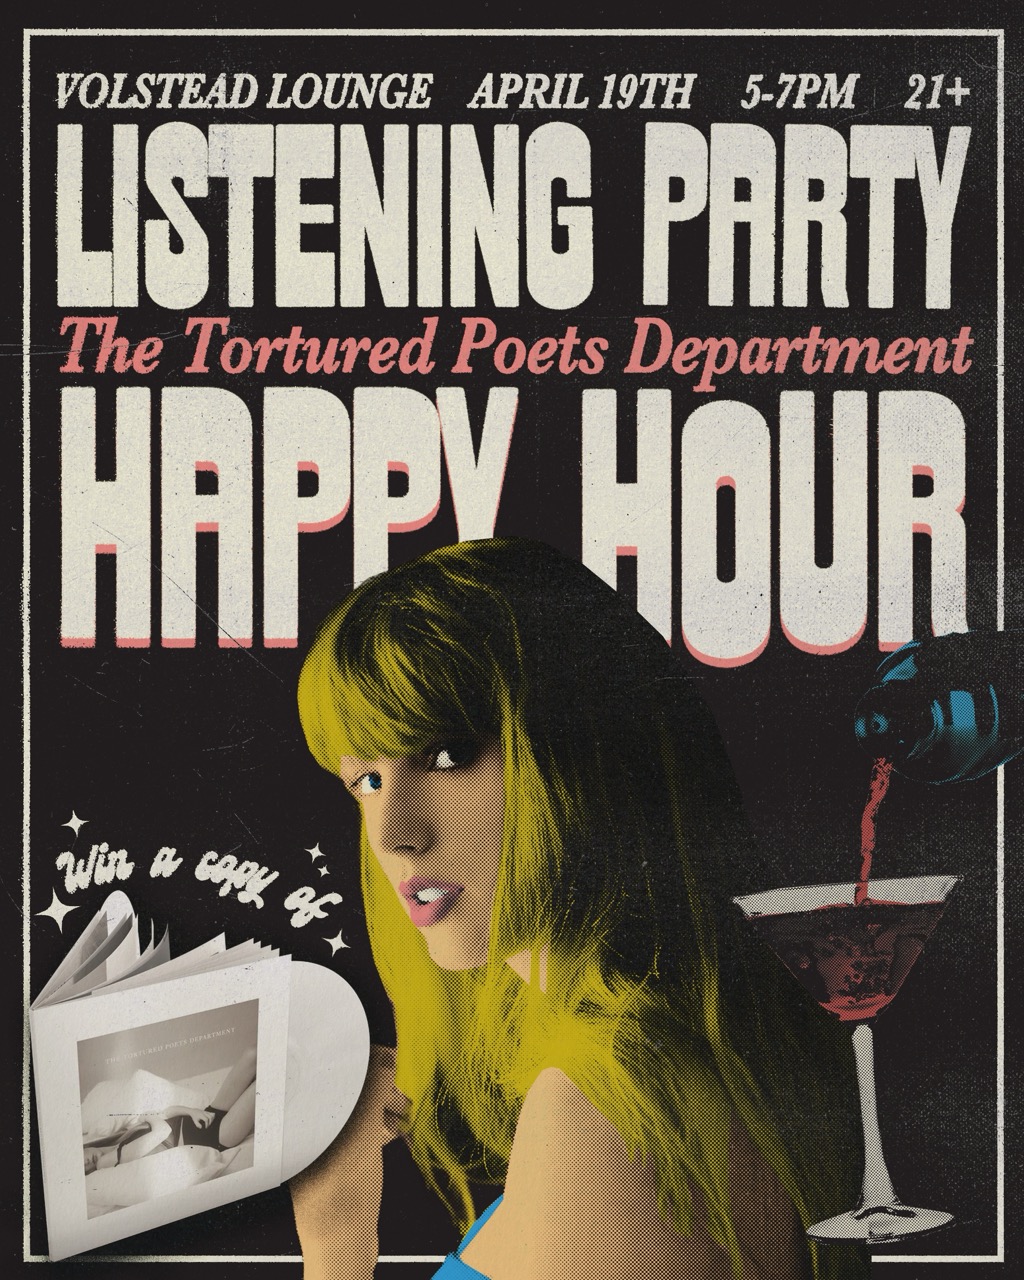 'The Tortured Poets Department' Listening Party Happy Hour @ Volstead Lounge